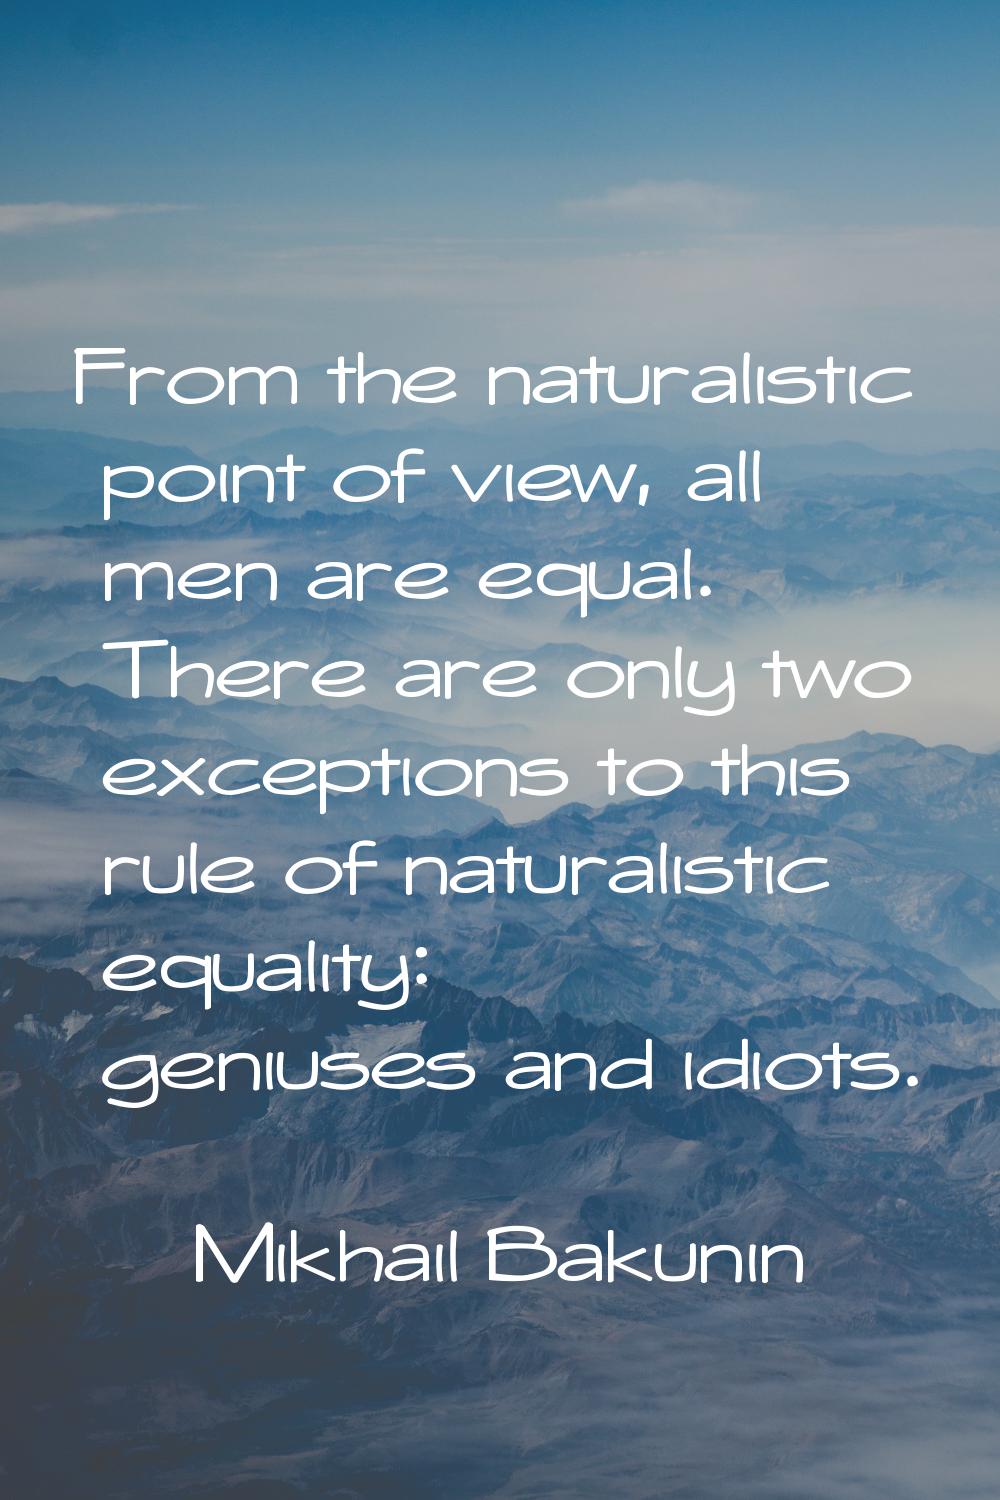 From the naturalistic point of view, all men are equal. There are only two exceptions to this rule 